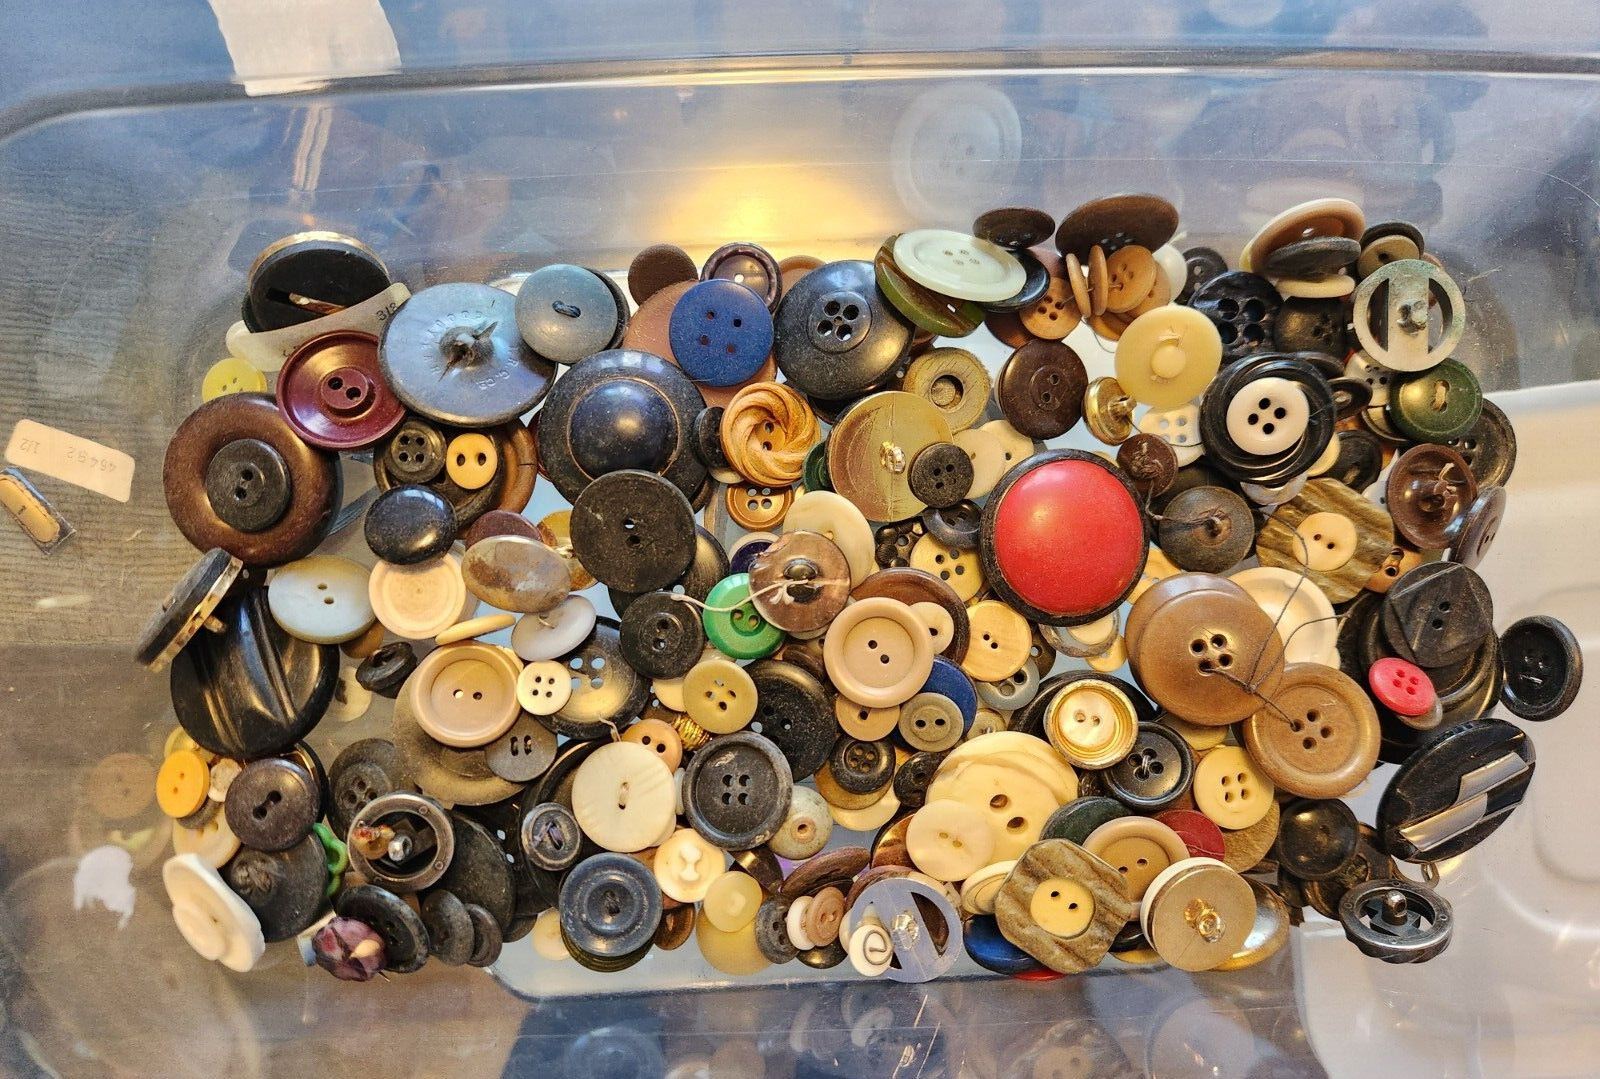 HUGE  Vintage Button Lot 5+ Pounds of estate fresh unpicked Buttons crafting